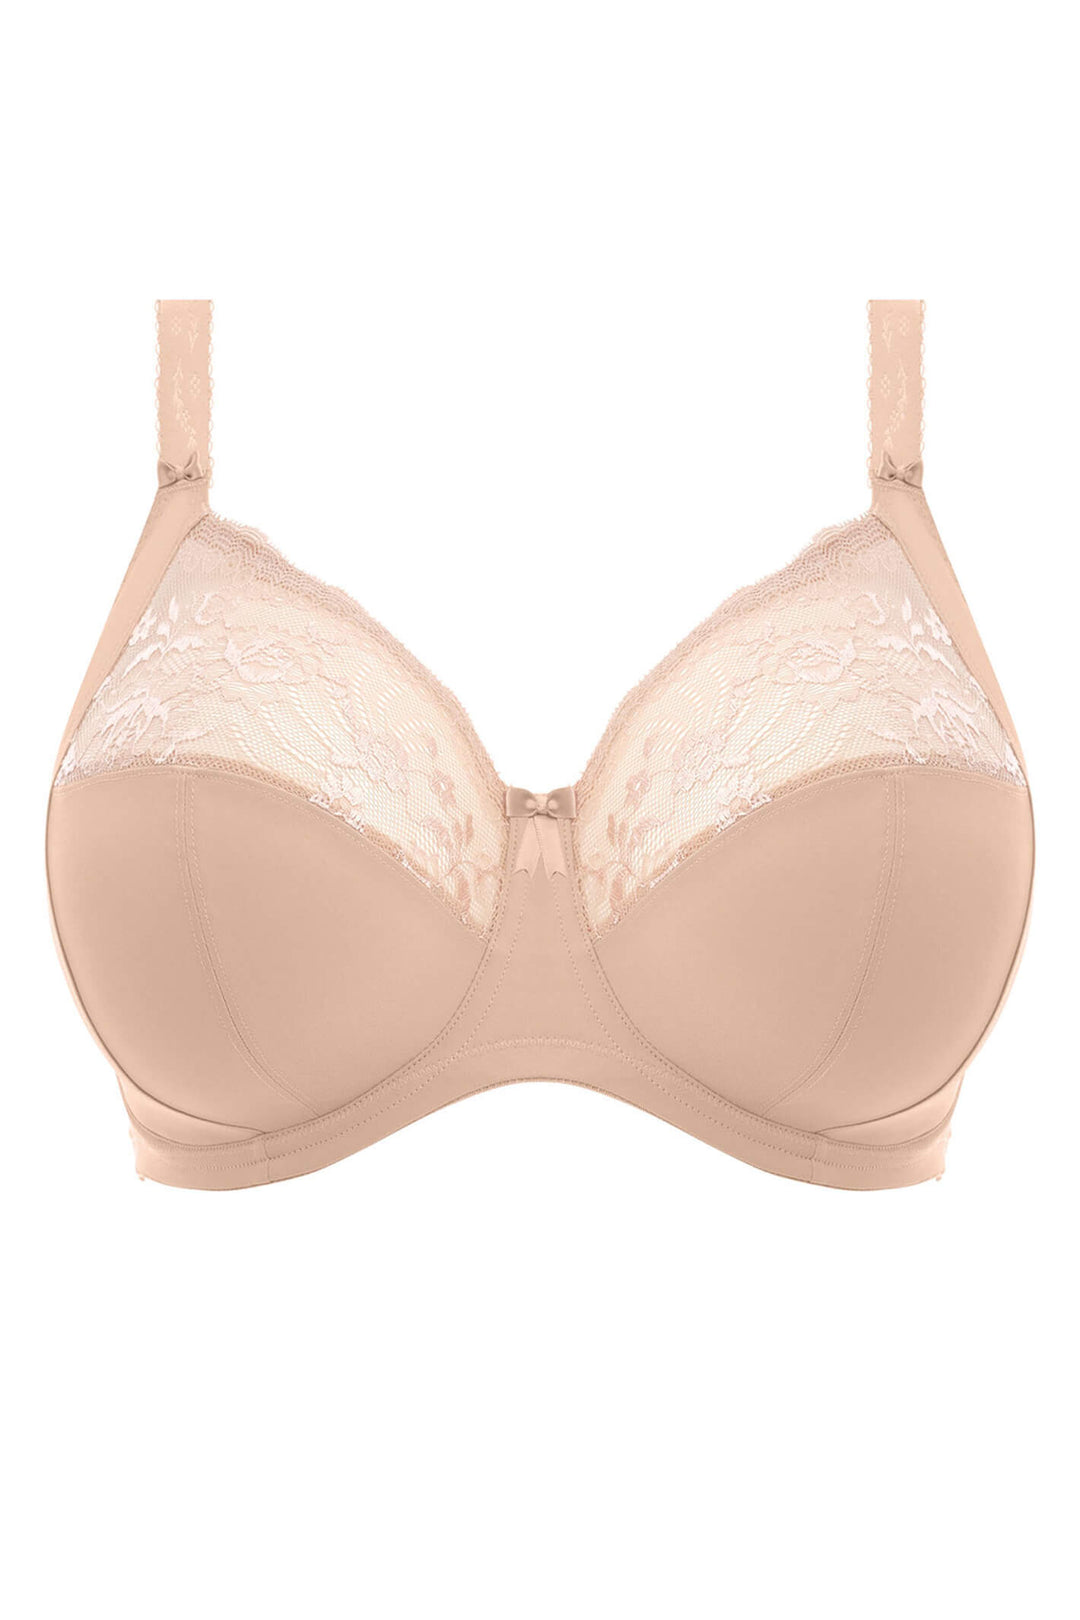 Elomi EL4111SAH Morgan Sahara Stretch Banded Underwired Full Cup Bra - Rouge Boutique Inverness